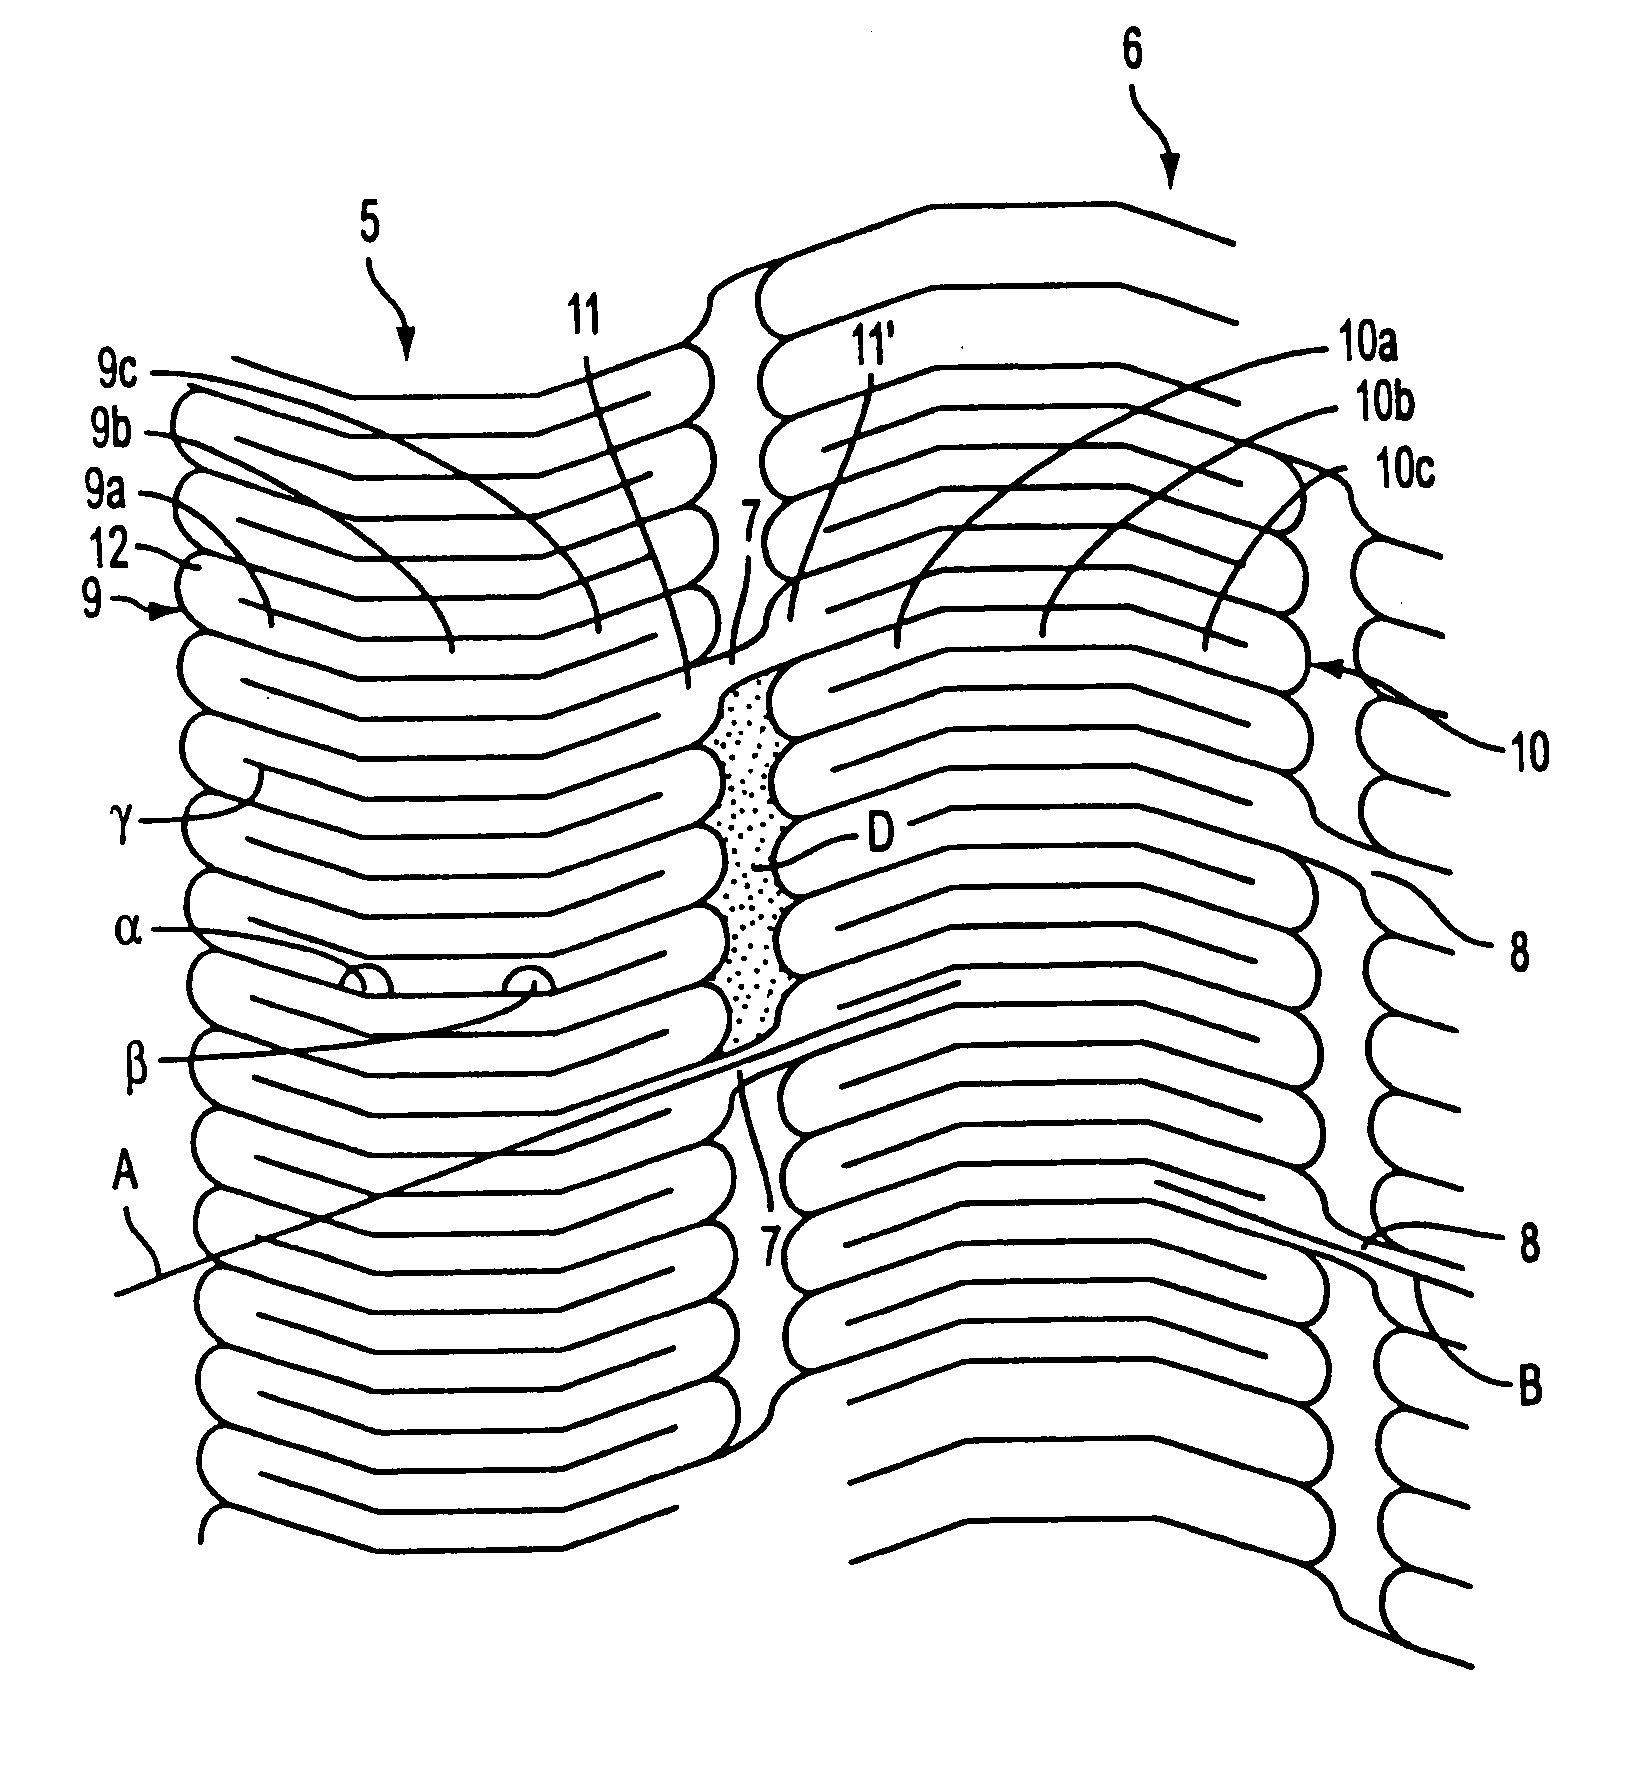 Methods and apparatus for stenting comprising enhanced embolic protection coupled with improved protecions against restenosis and thrombus formation